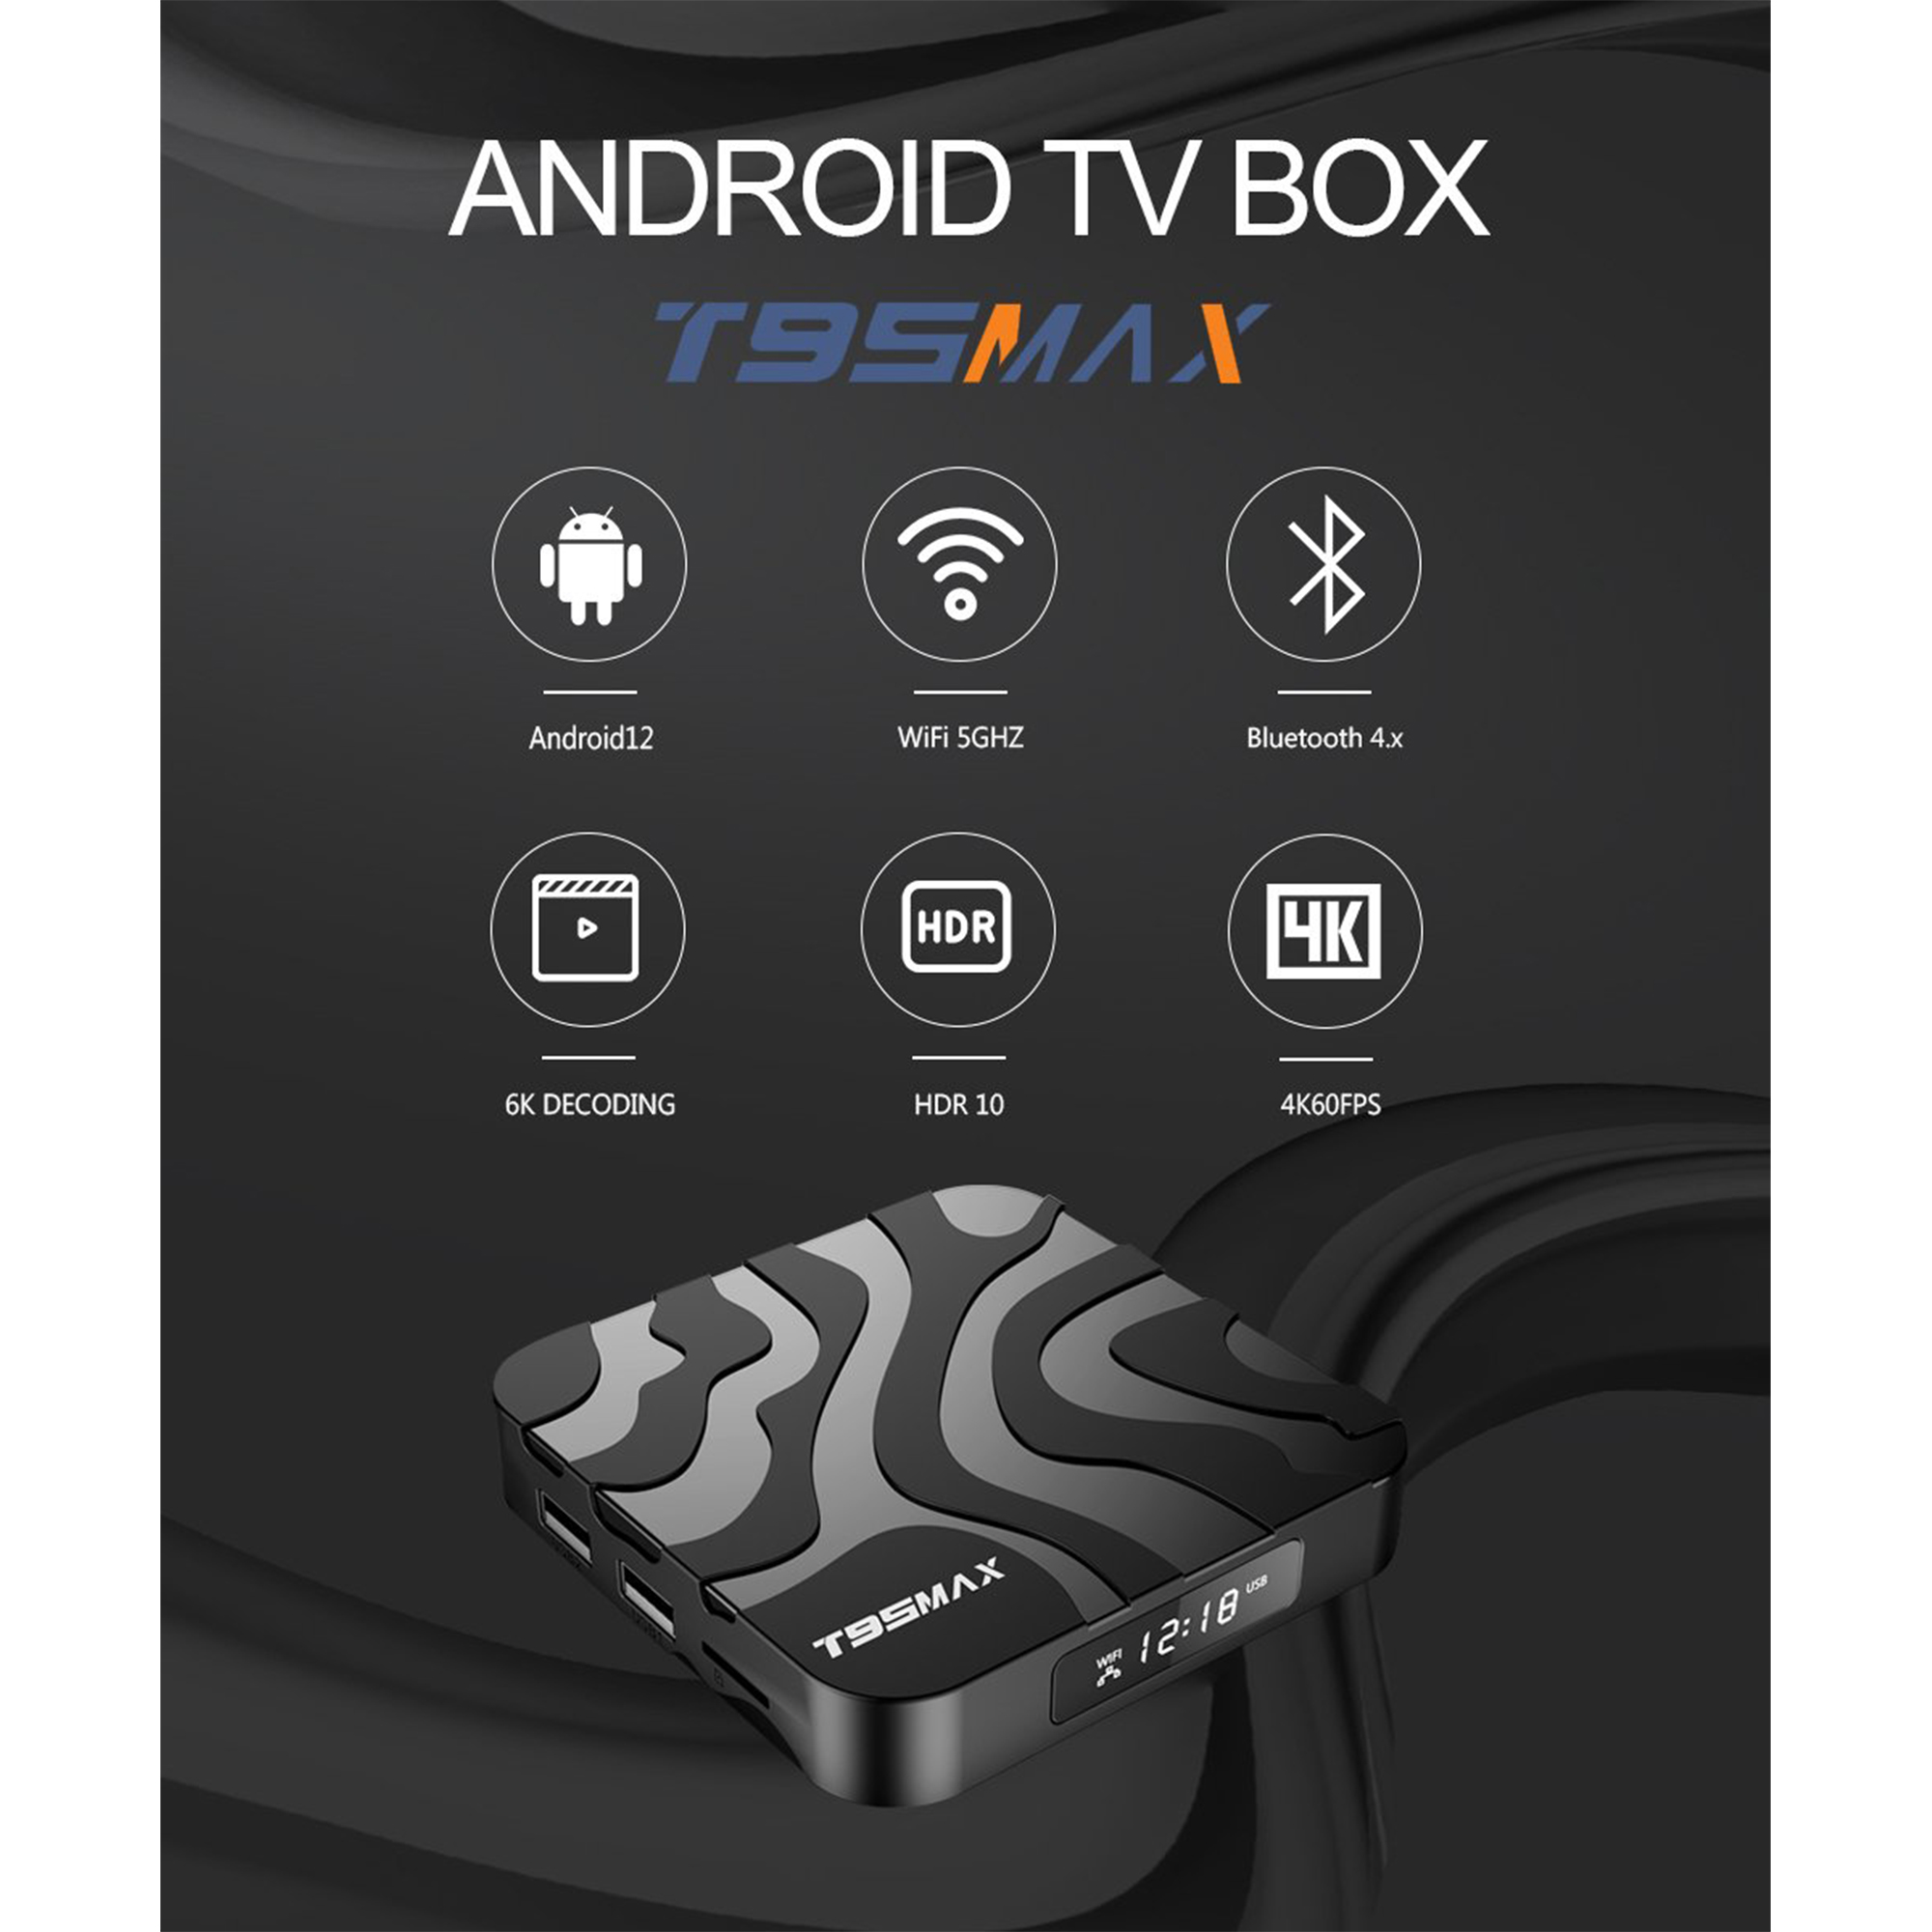 LIPA T95 Max Android Tv player, box Black 12 Android GB Multimedia 16